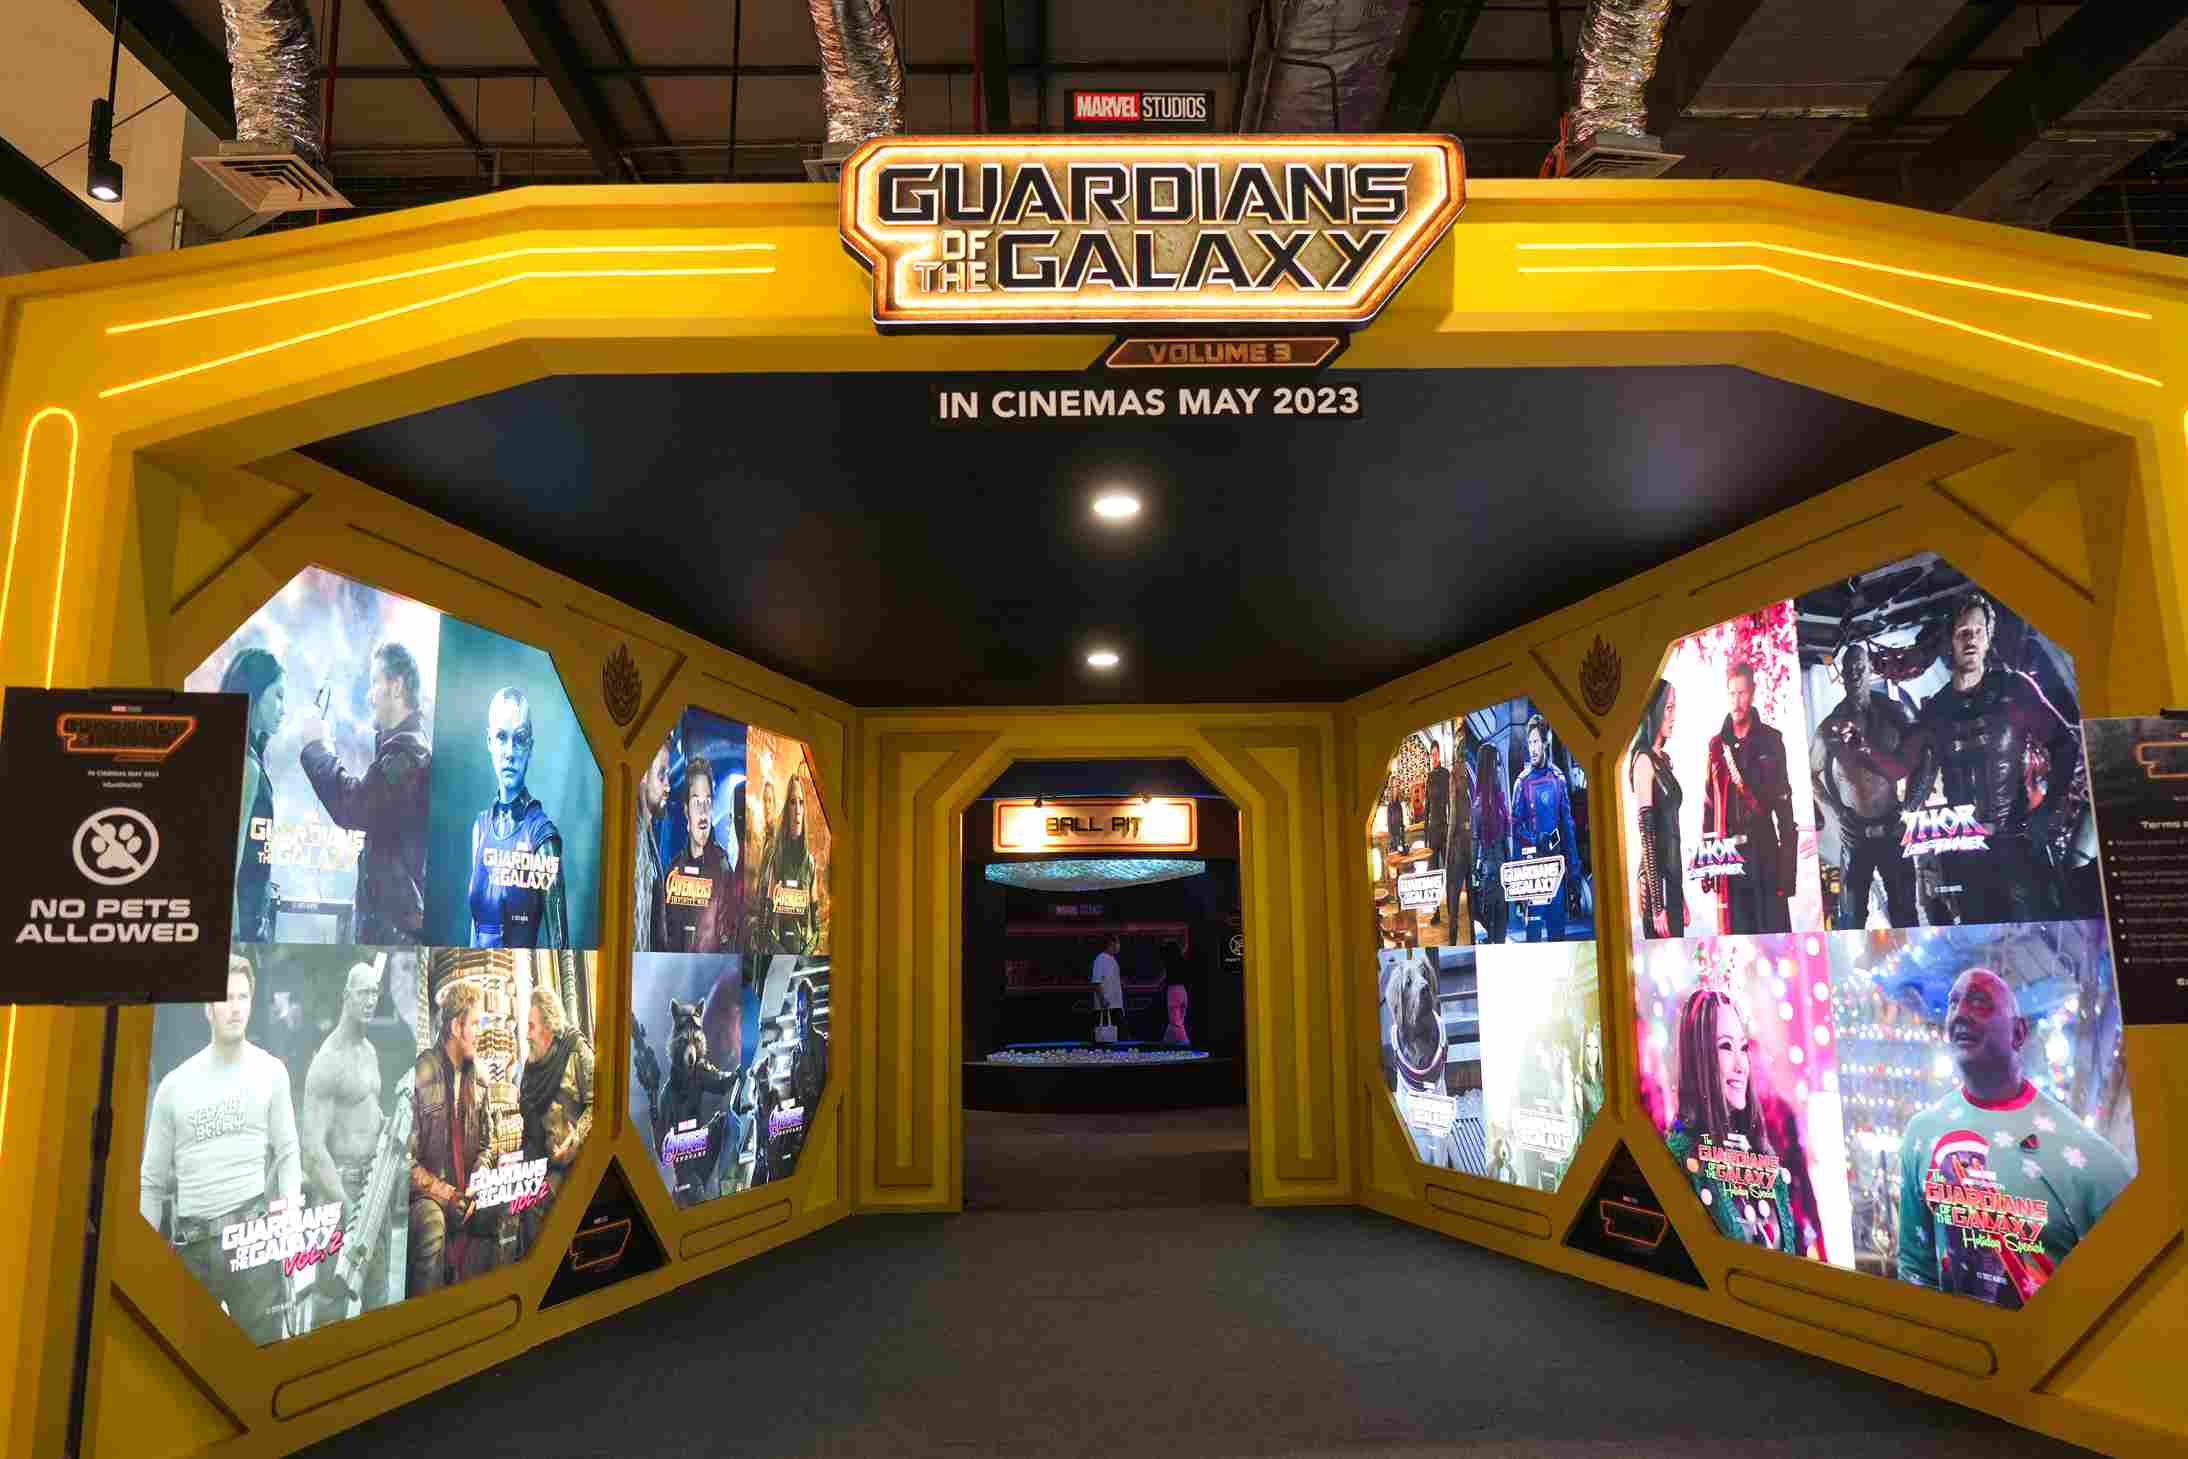 Mall Exhibition Guardians of The Galaxy Vol.3. Marvel. Disney. Mall of Indonesia.